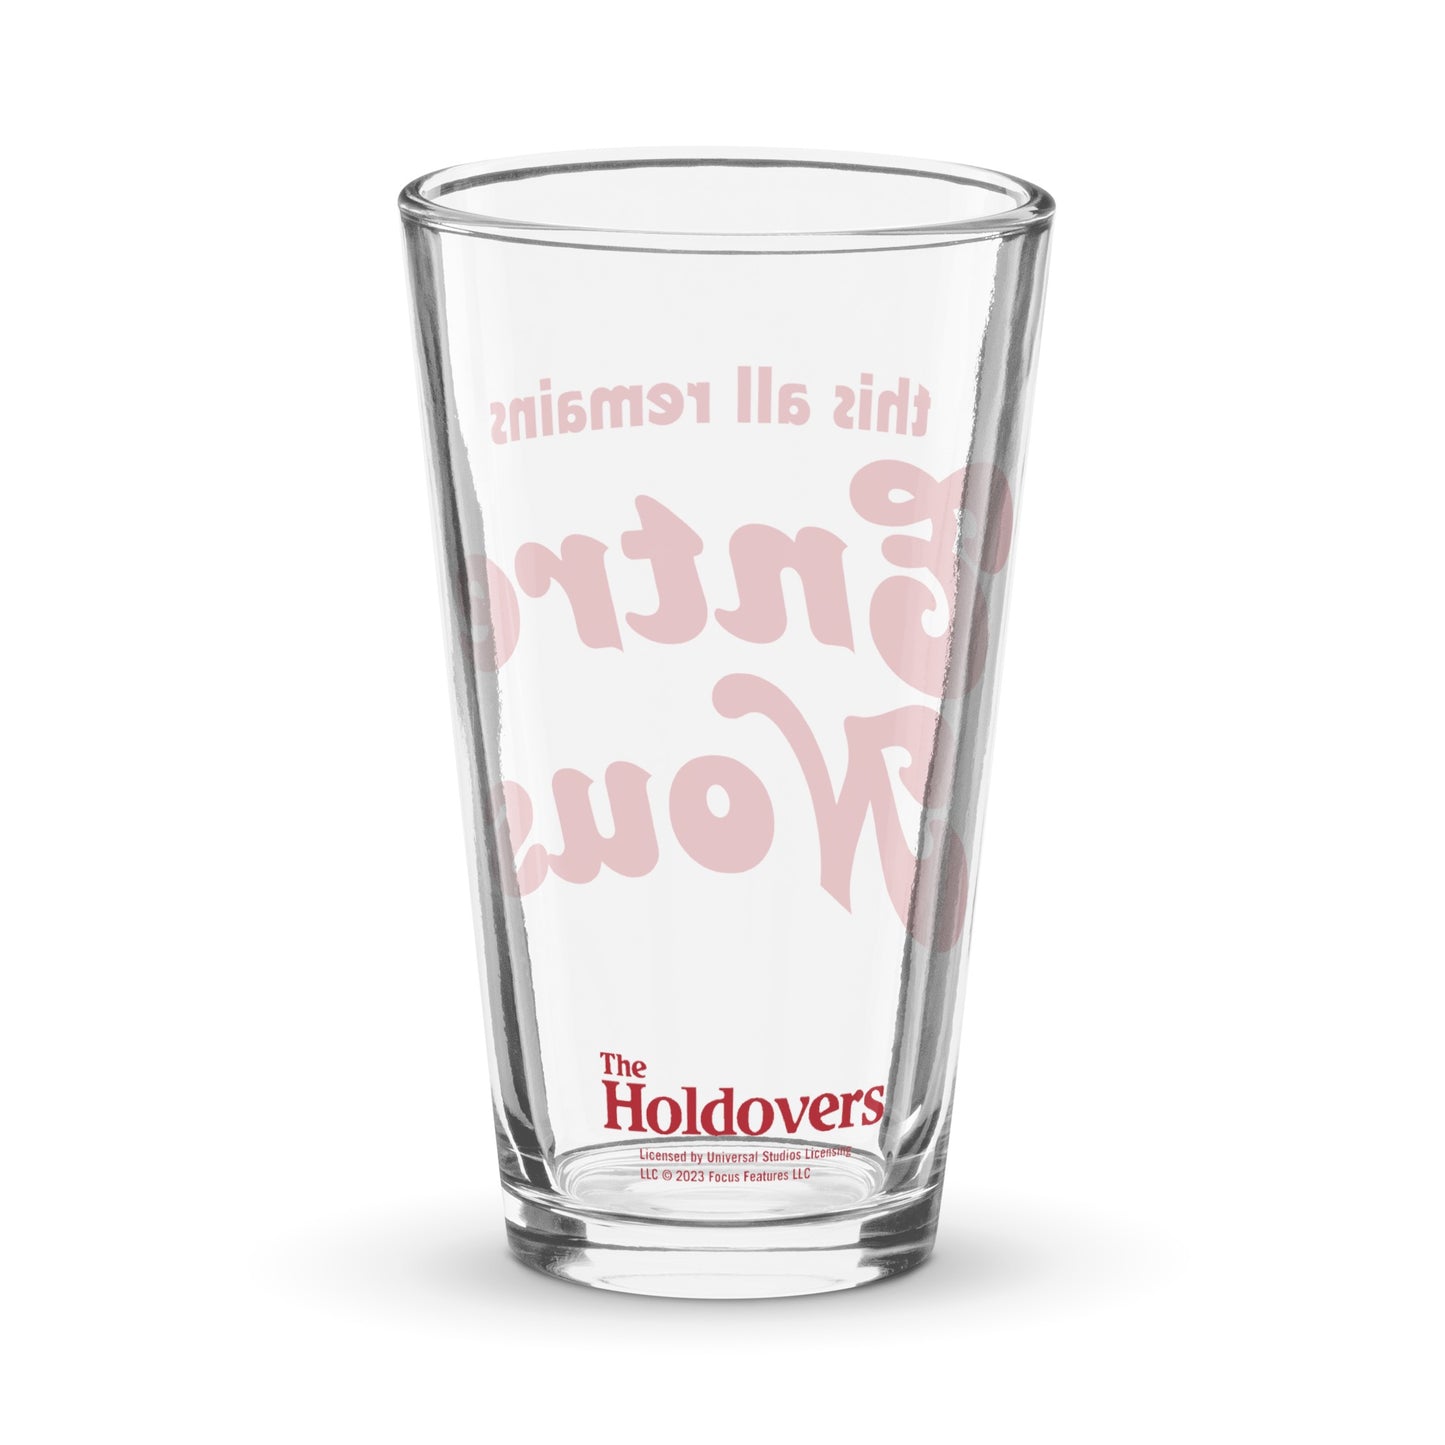 The Holdovers Entre Nous Pint Glass